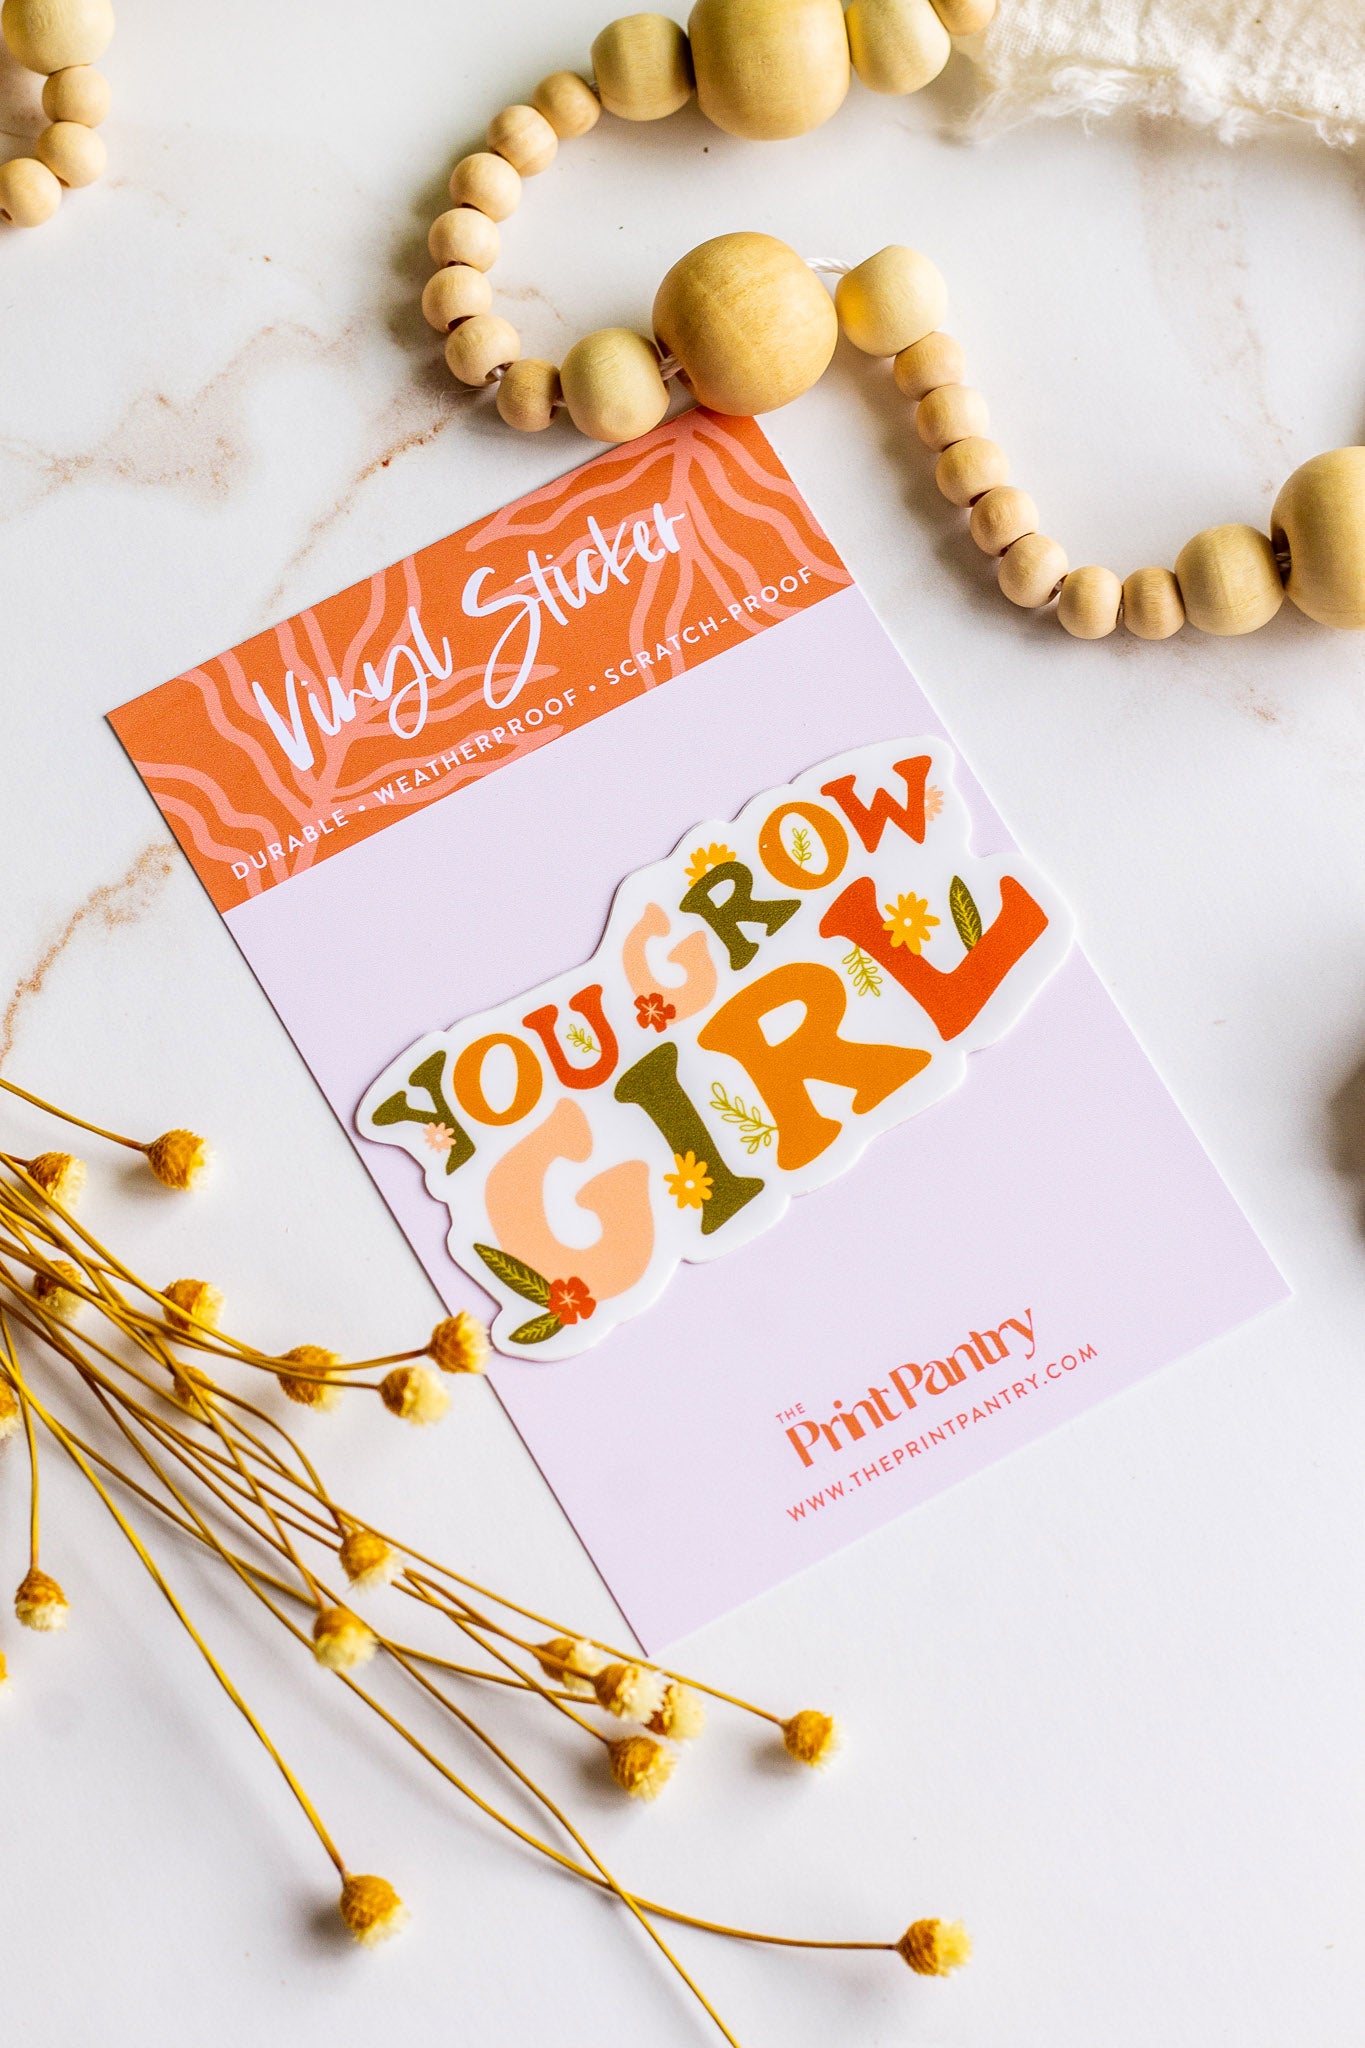 You Grow Girl Vinyl Sticker laying on it's informational sticker backing card